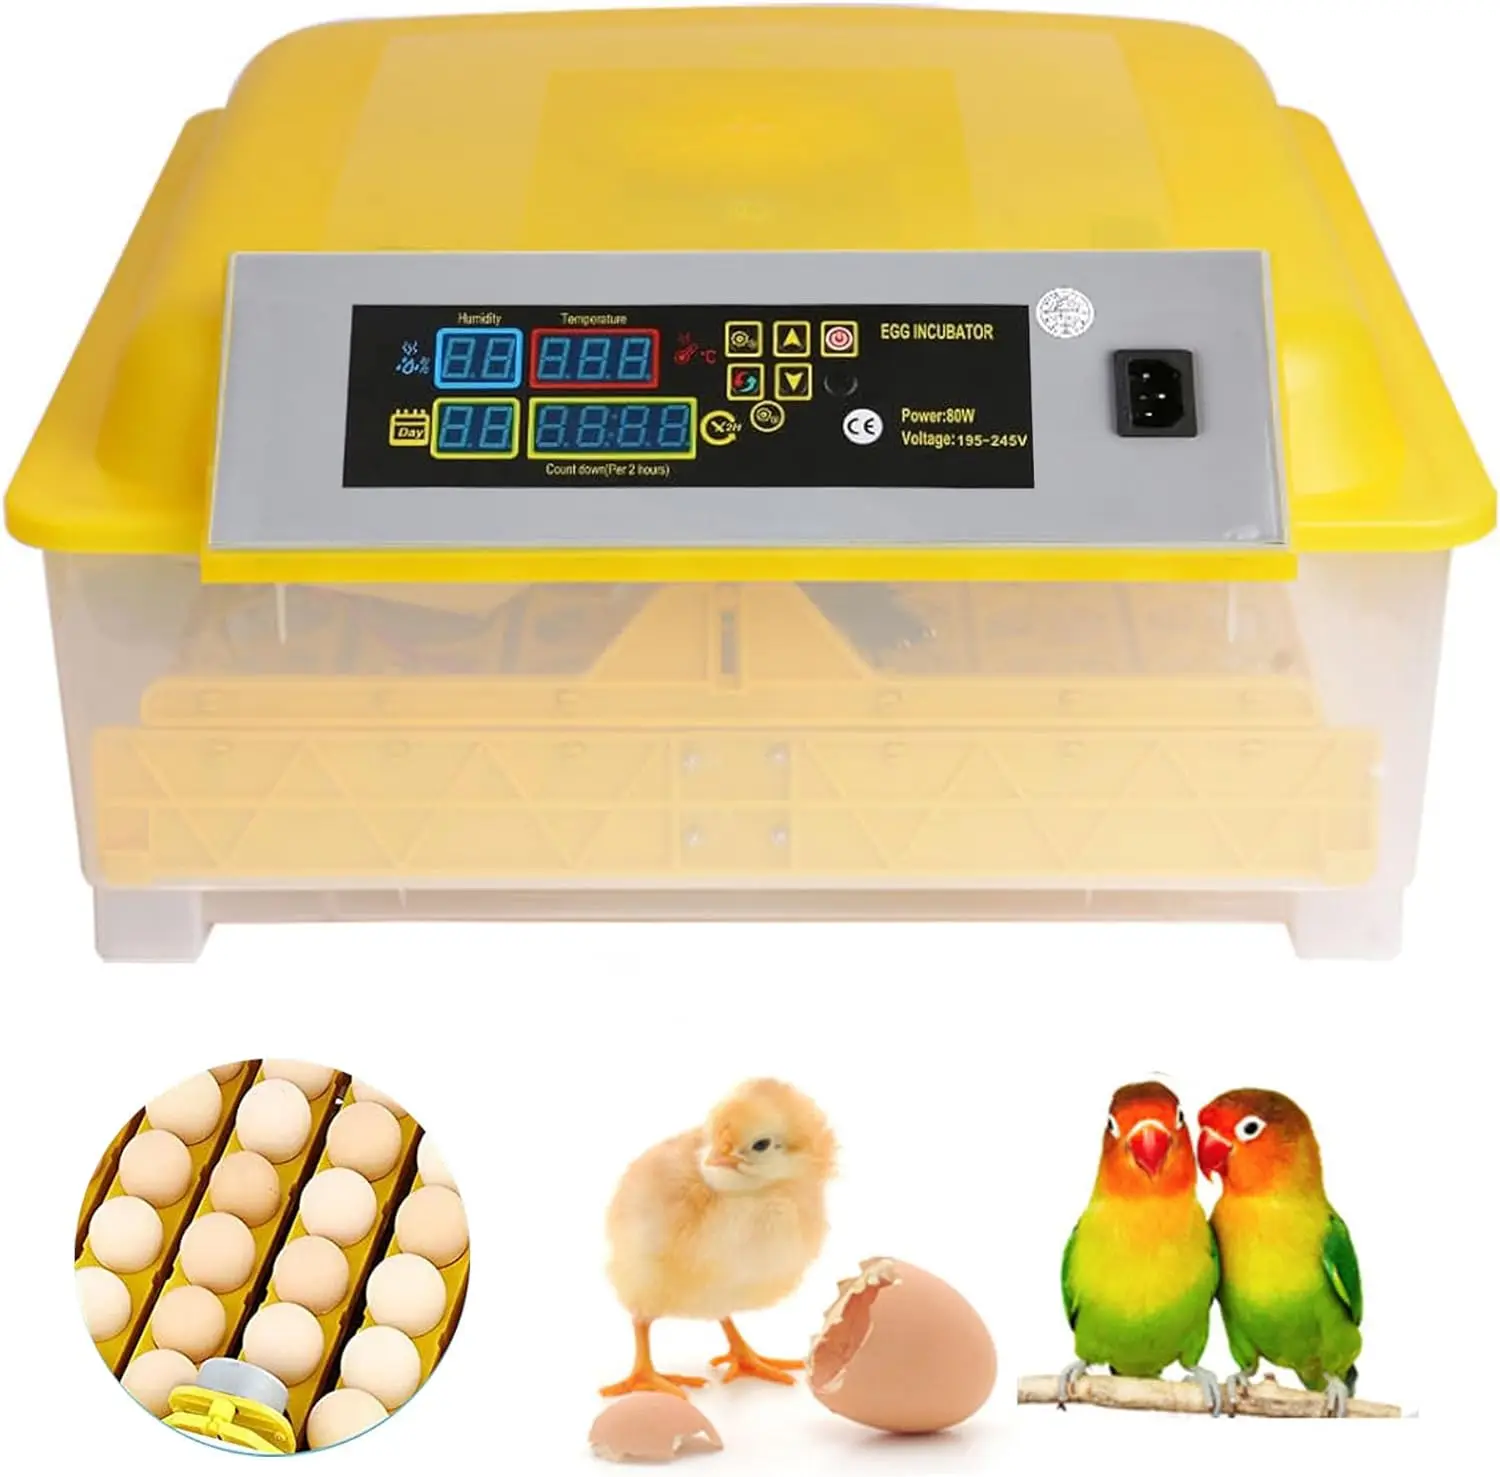 

48egg incubator digital poultry hatchers with automatic egg turning,temperature and humidity control LED screens chicken coop